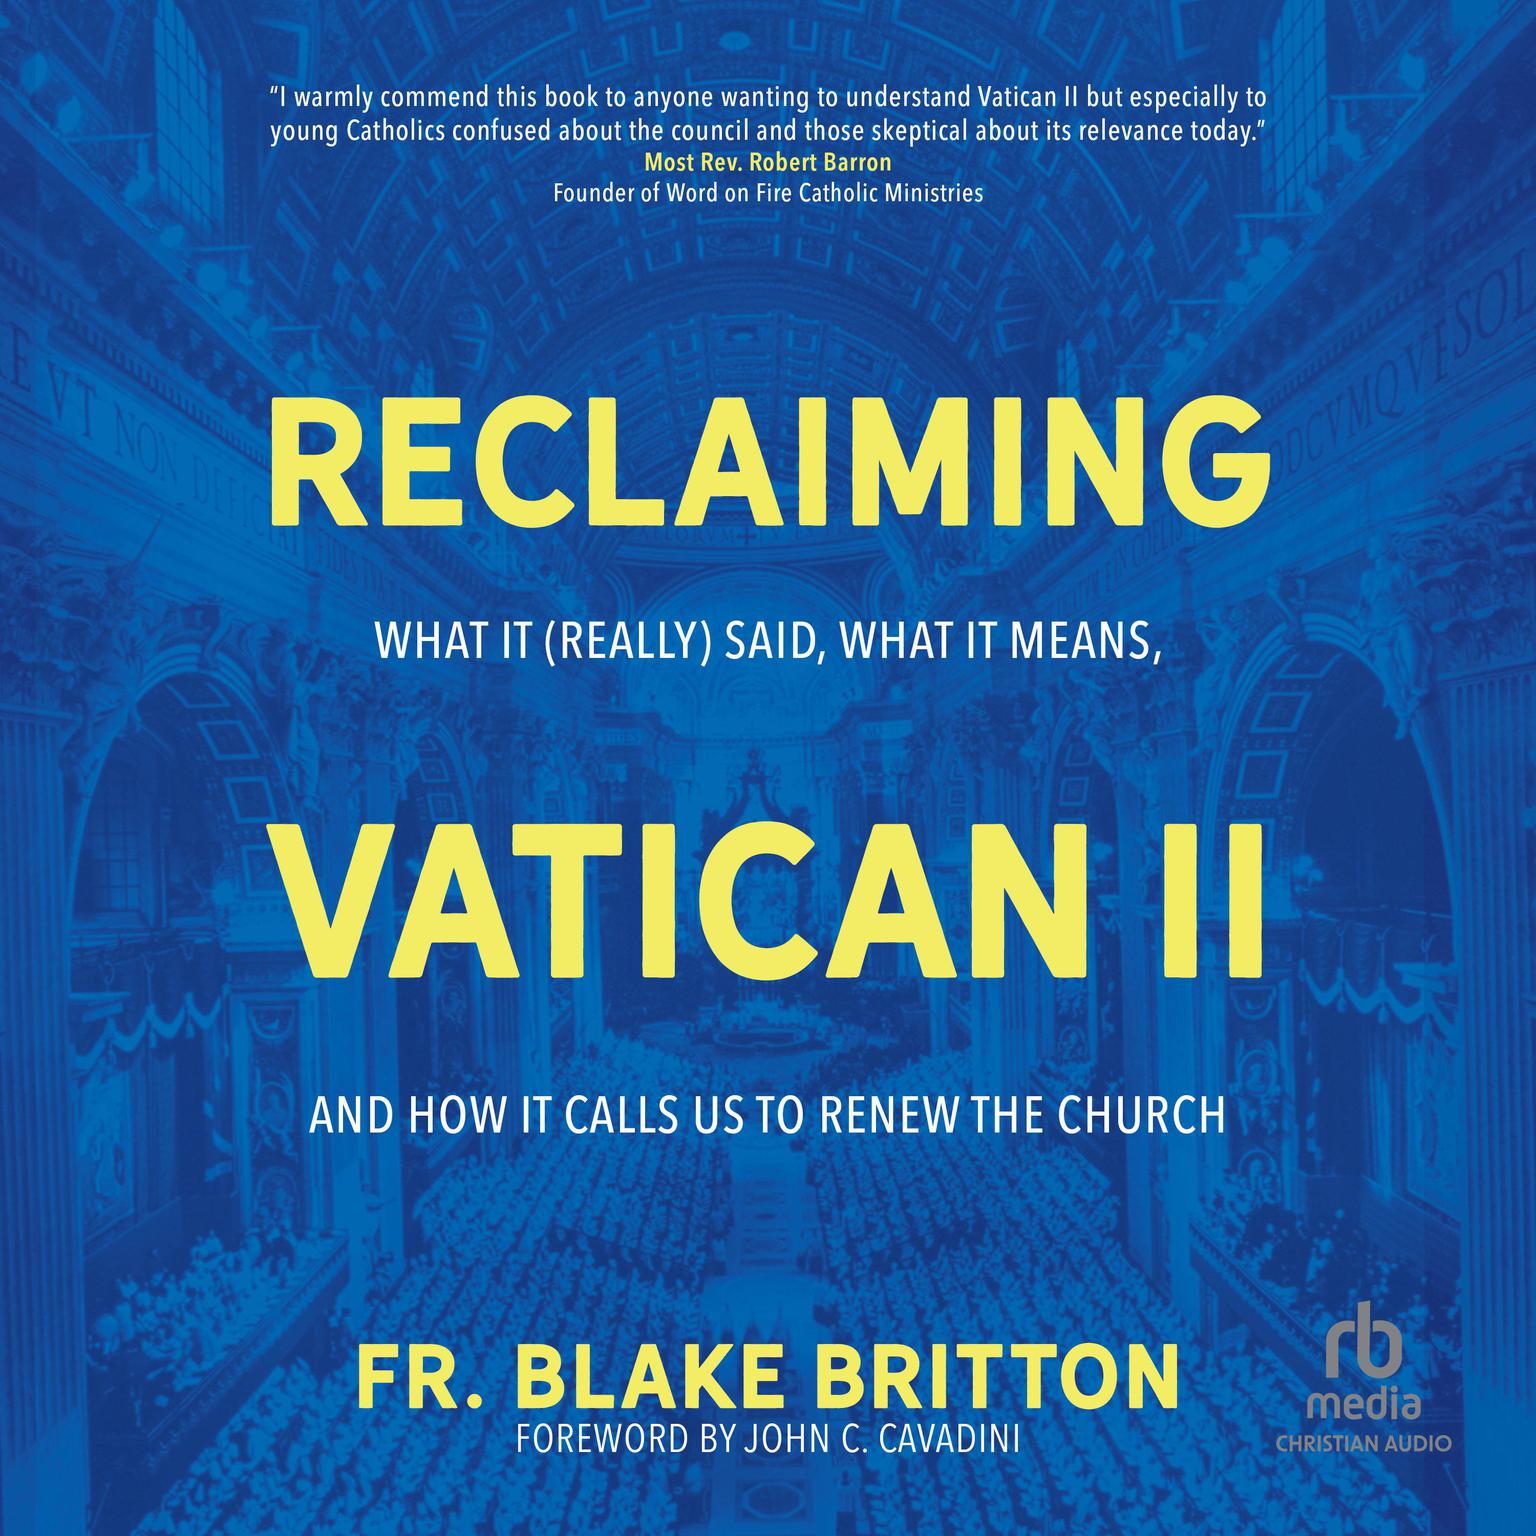 Reclaiming Vatican II: What It (Really) Said, What It Means, and How It Calls Us to Renew the Church Audiobook, by Fr. Blake Britton